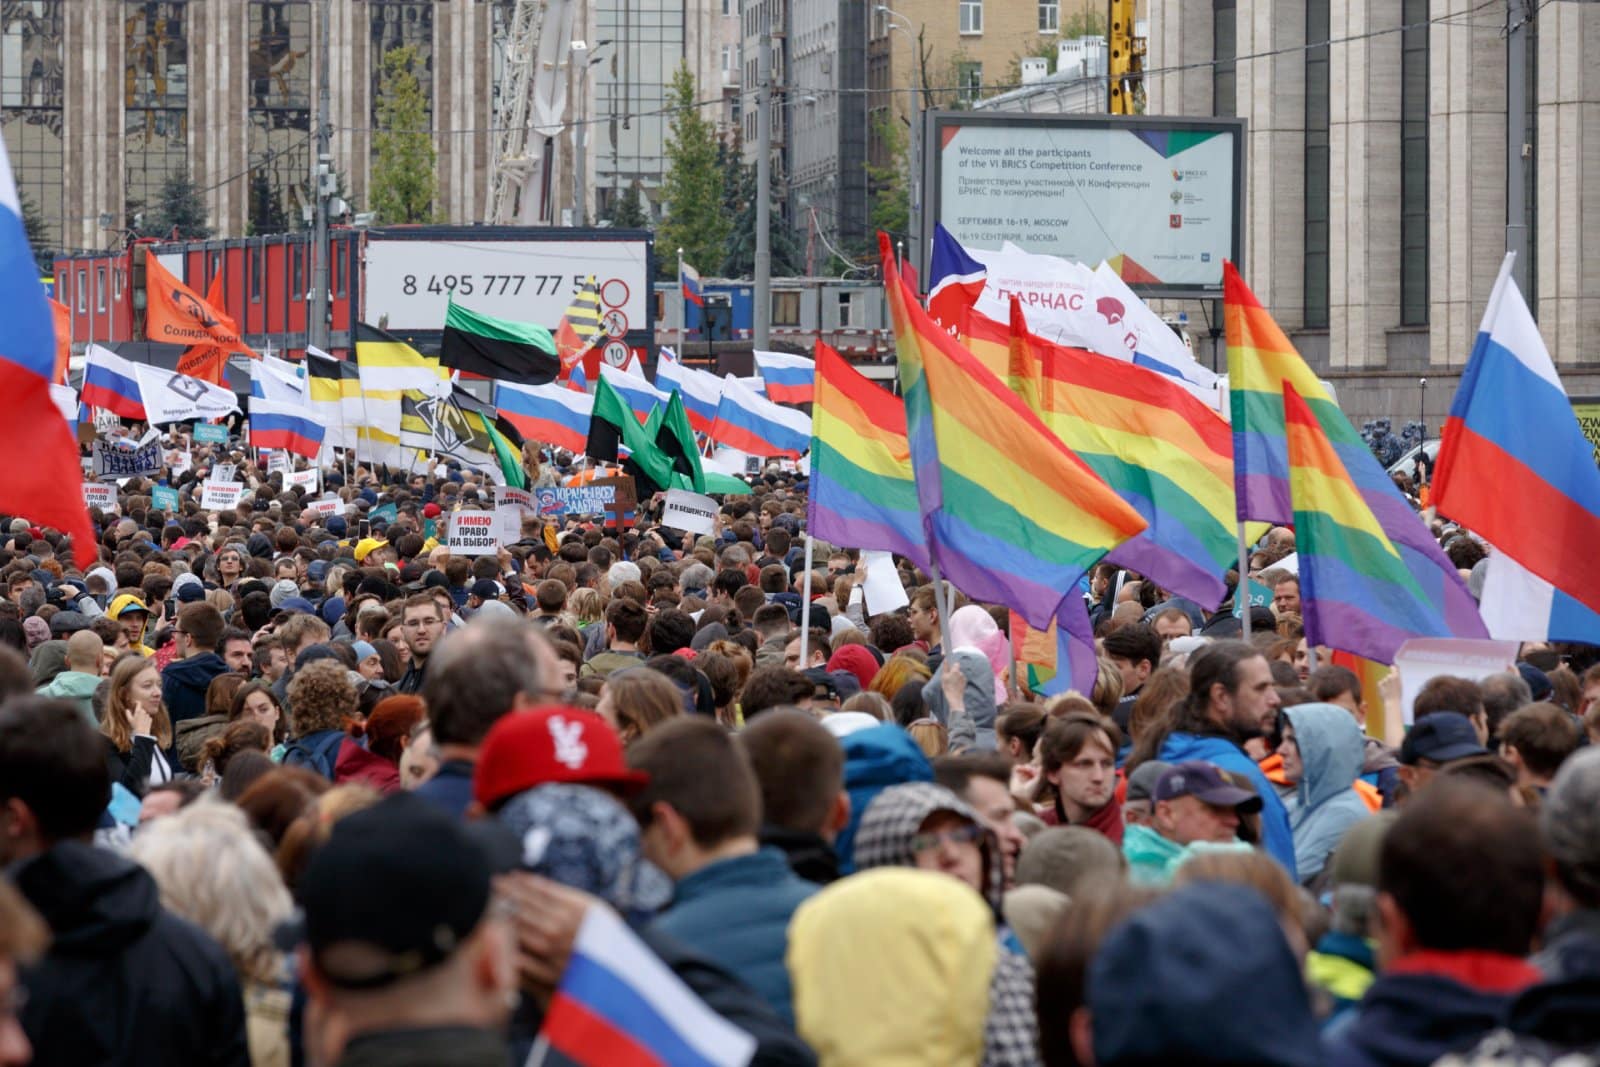 Image Credit: Shutterstock / Irina Boldina <p><span>Reports of abductions, torture, and killings of LGBTQ people have emerged from Chechnya, marking an egregious human rights crisis.</span></p>